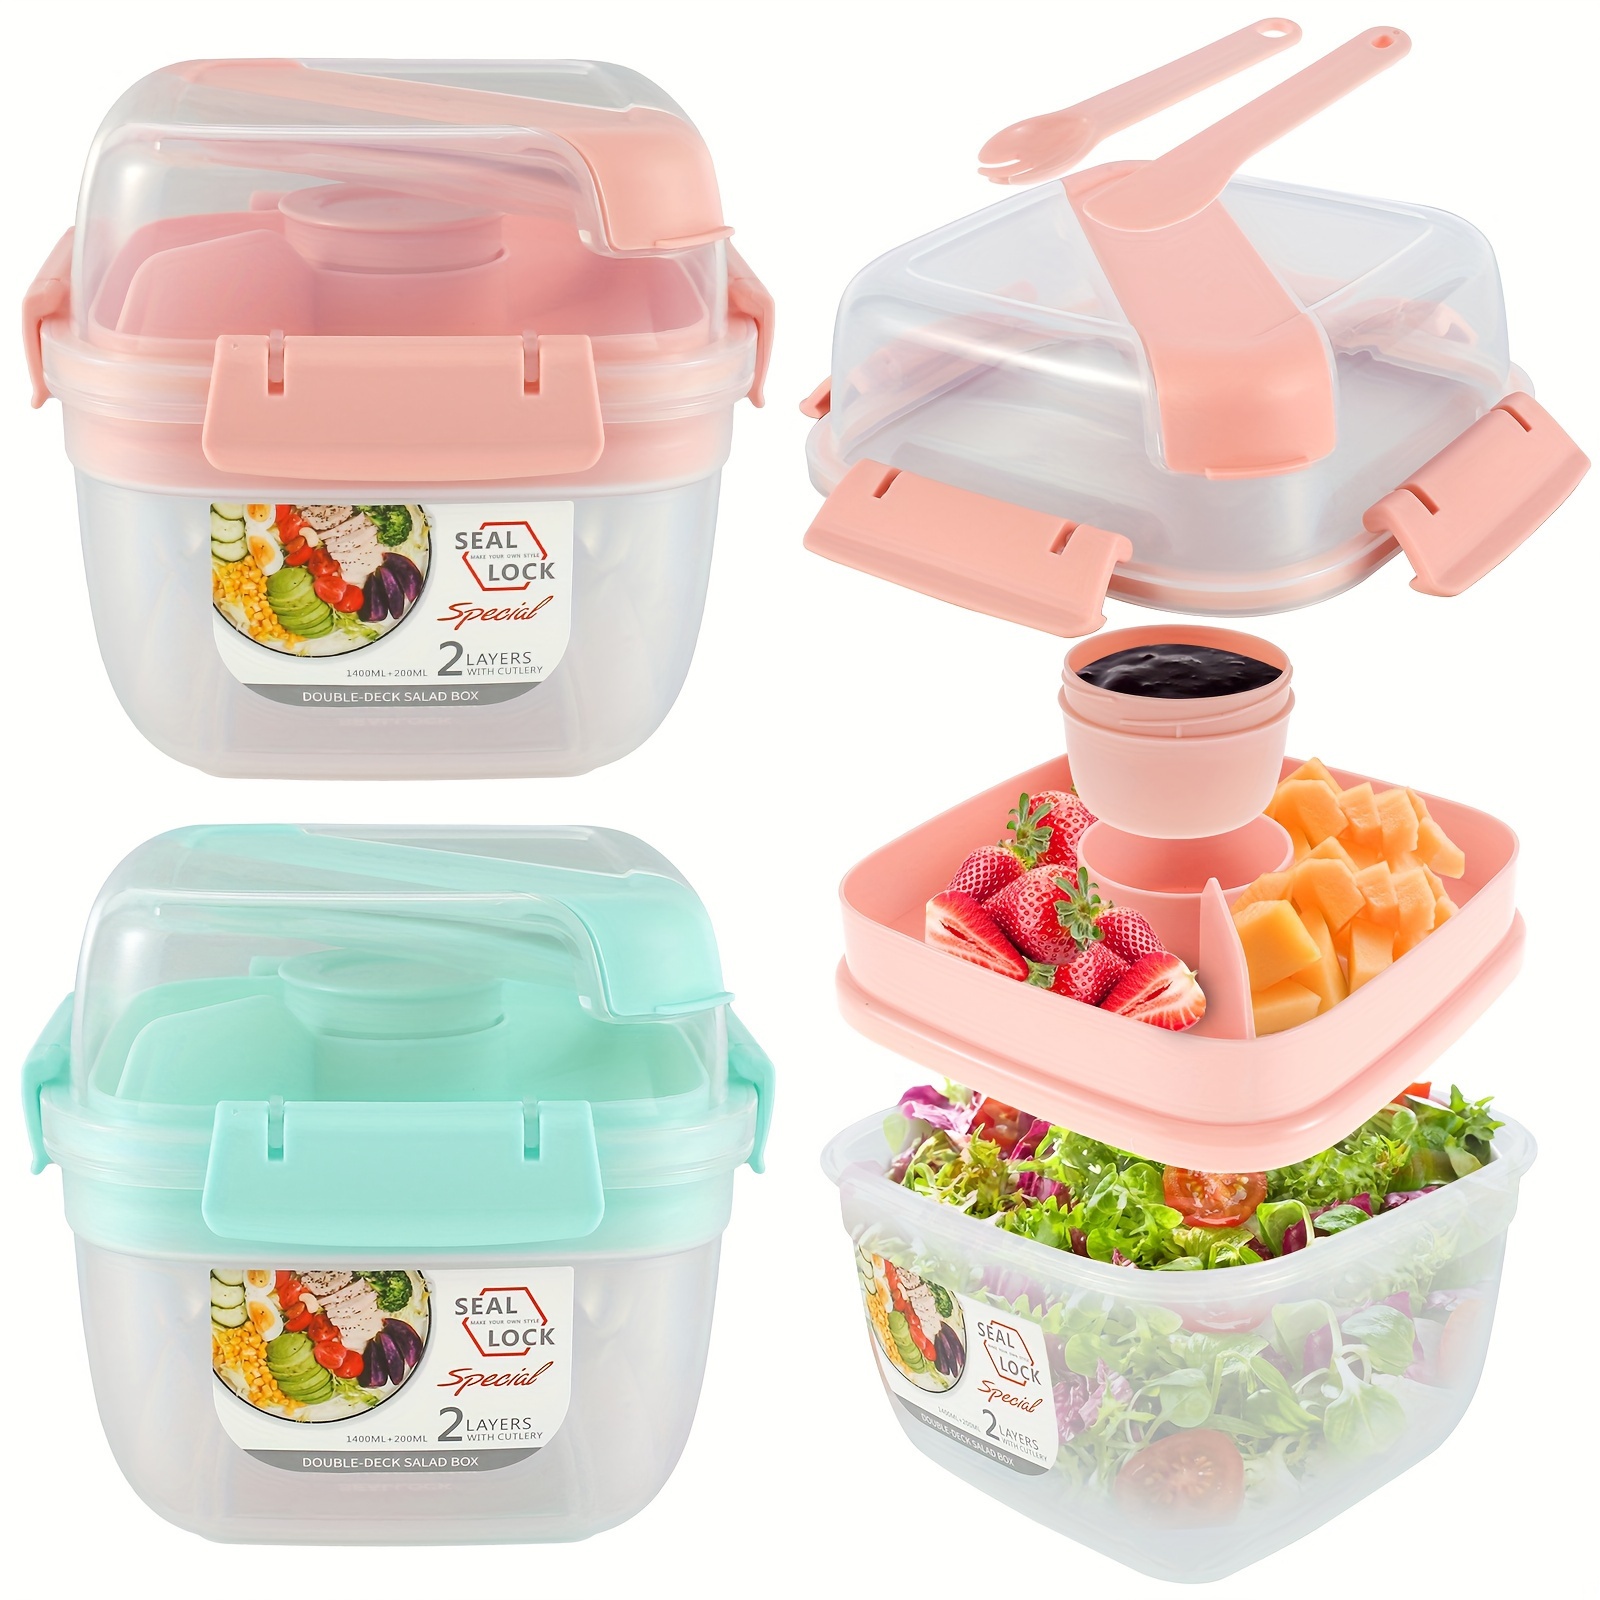 Bento Box Adult Lunch Box,Salad Container for Lunch with Large 52-oz Salad  Bowl,3-Compartment Bento-Style Tray and 3-oz Sauce Container for